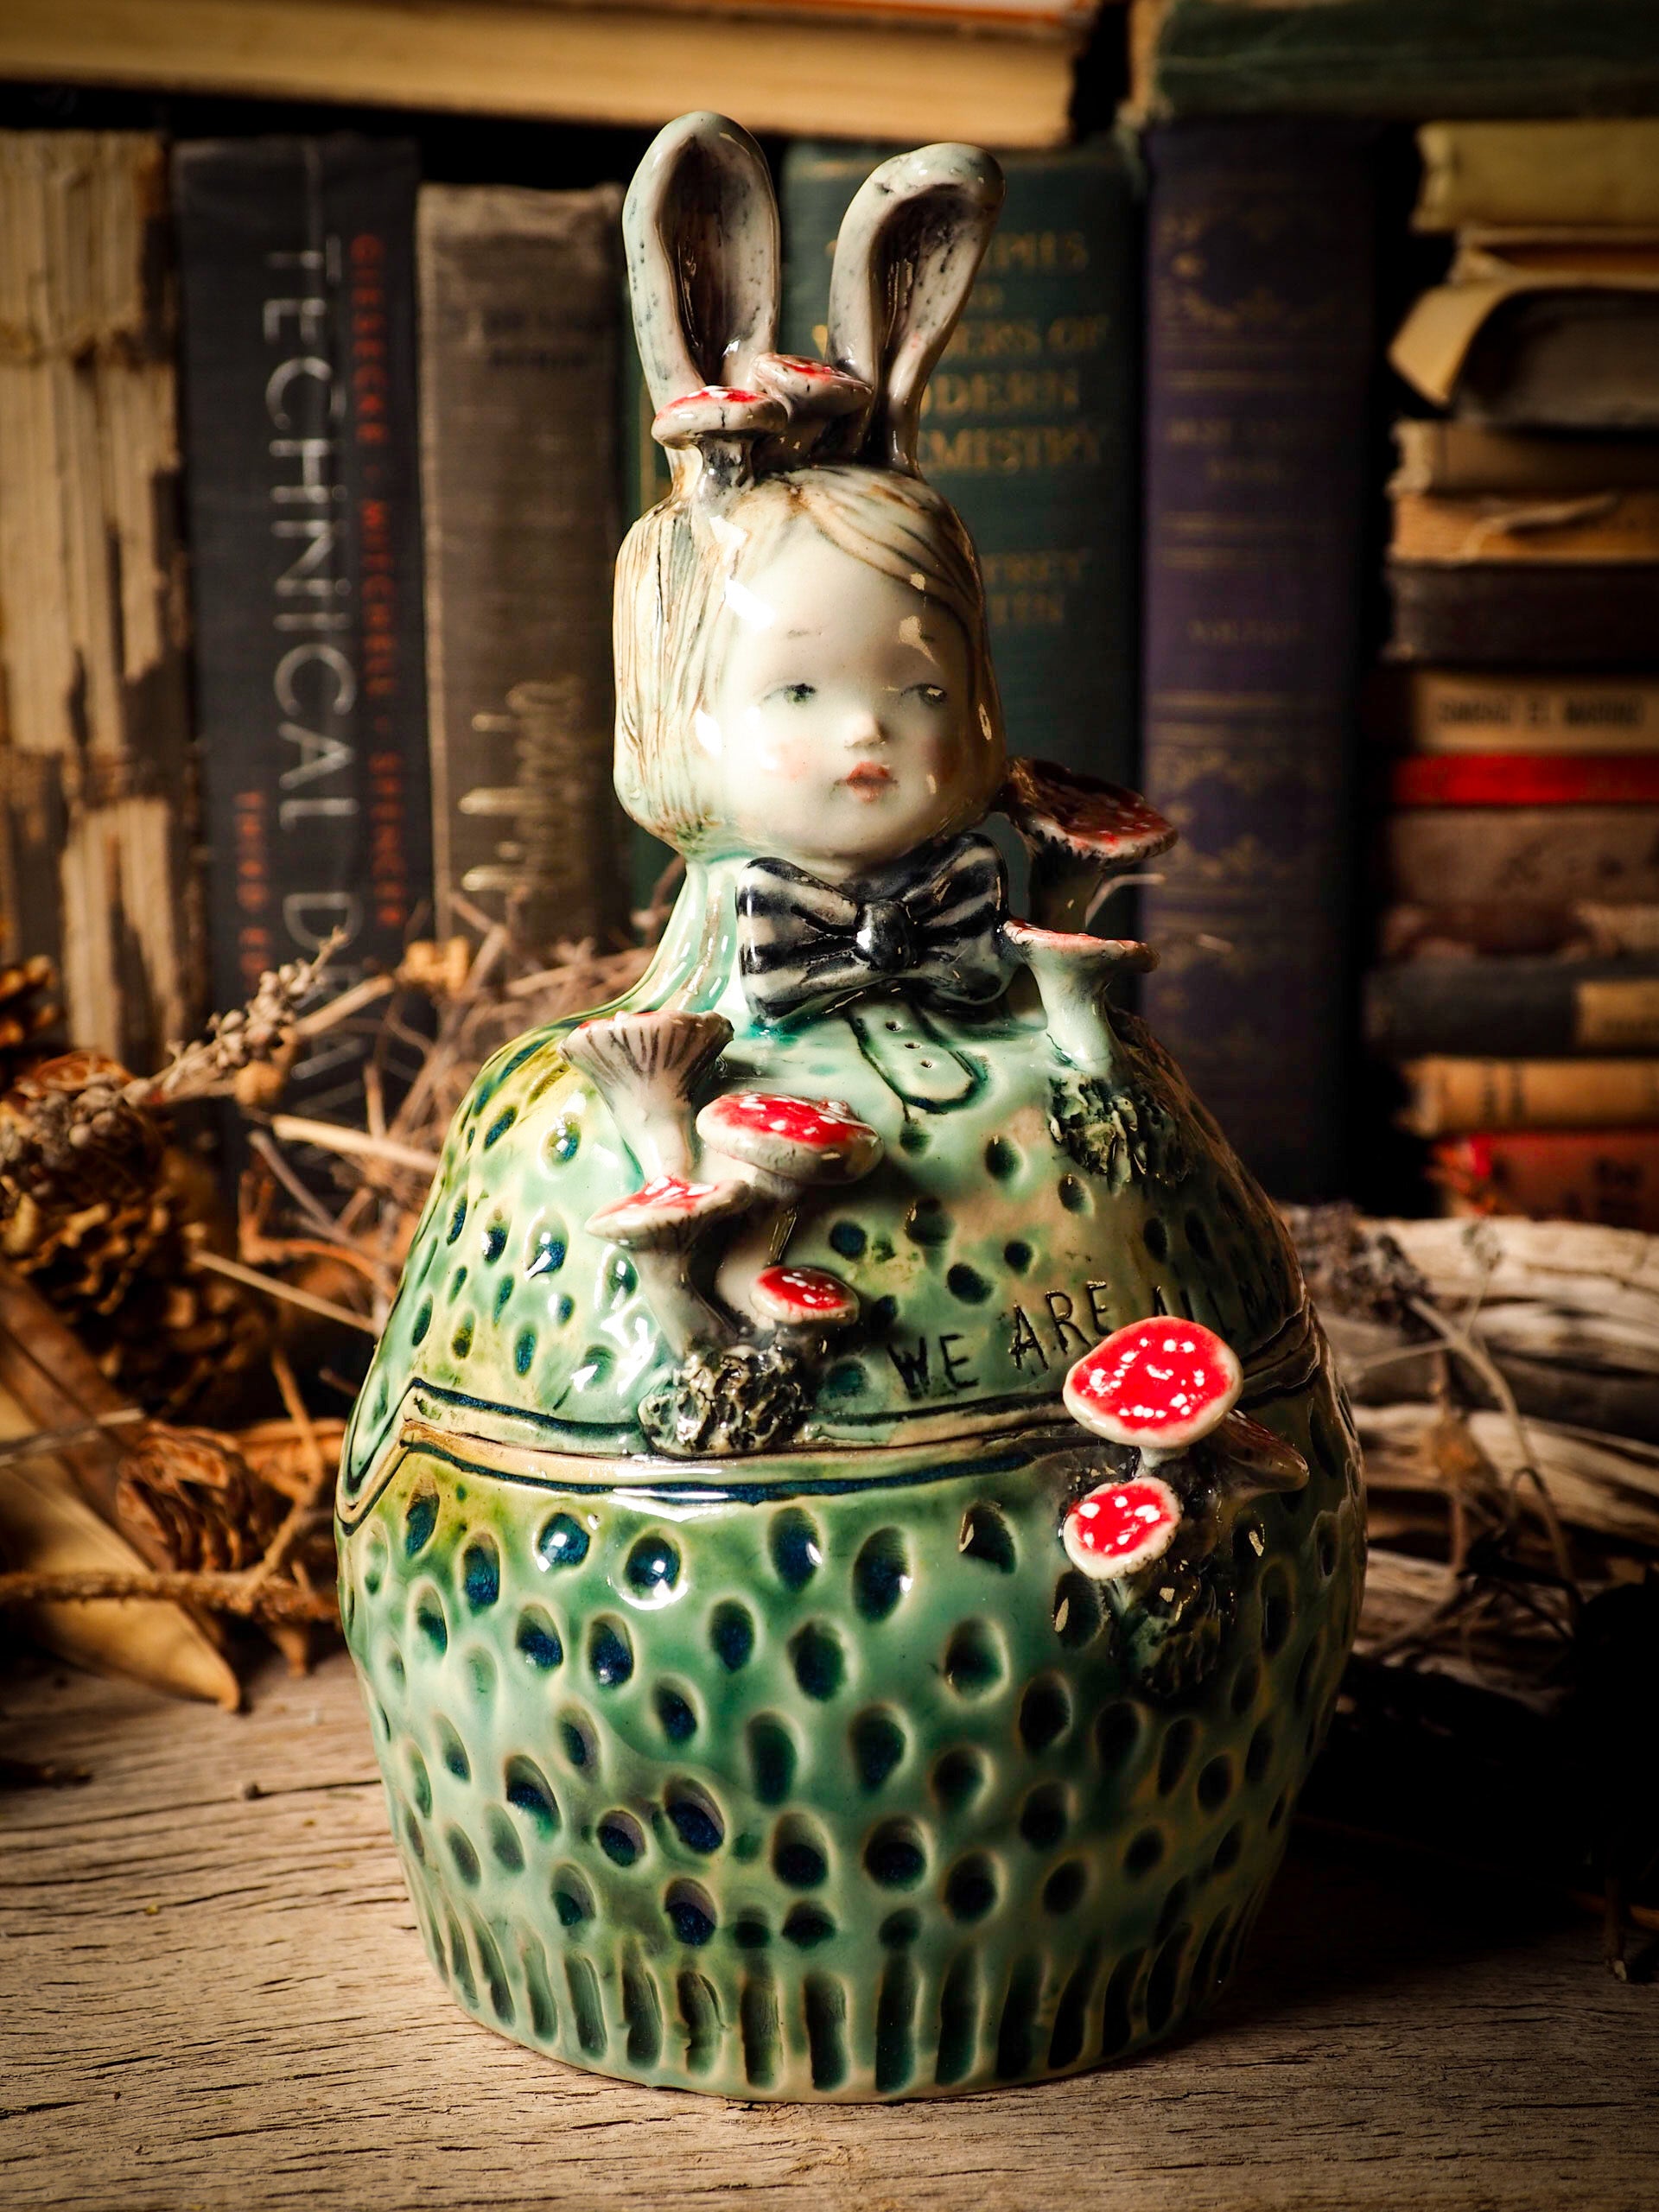 Alice the rabbit vintage ceramic figure inspired by Alice in Wonderland made by Idania Salcido, the mixed media artist and ceramist behind Danita Art. Earth clay is hand sculpted and glazed and kiln fired to create a ceramic home decor heirloom figurine. Each unique art piece is a one of a kind fine pottery artwork.